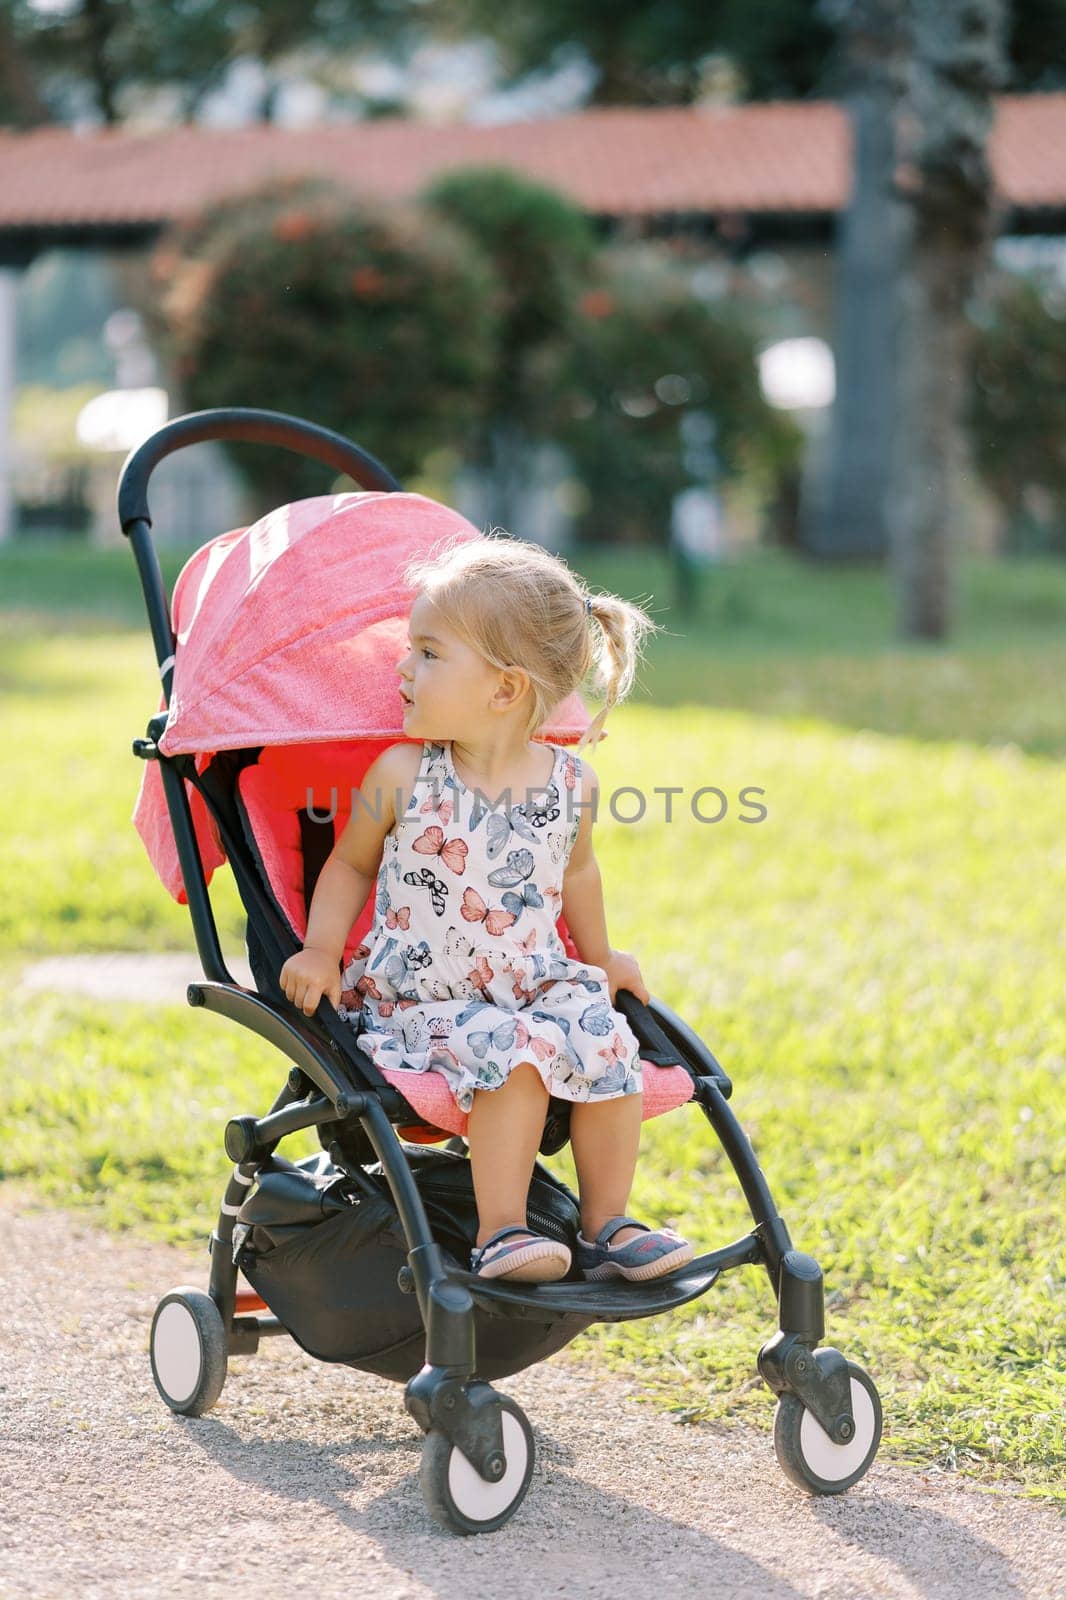 Little girl sitting in a stroller in the park looking back by Nadtochiy